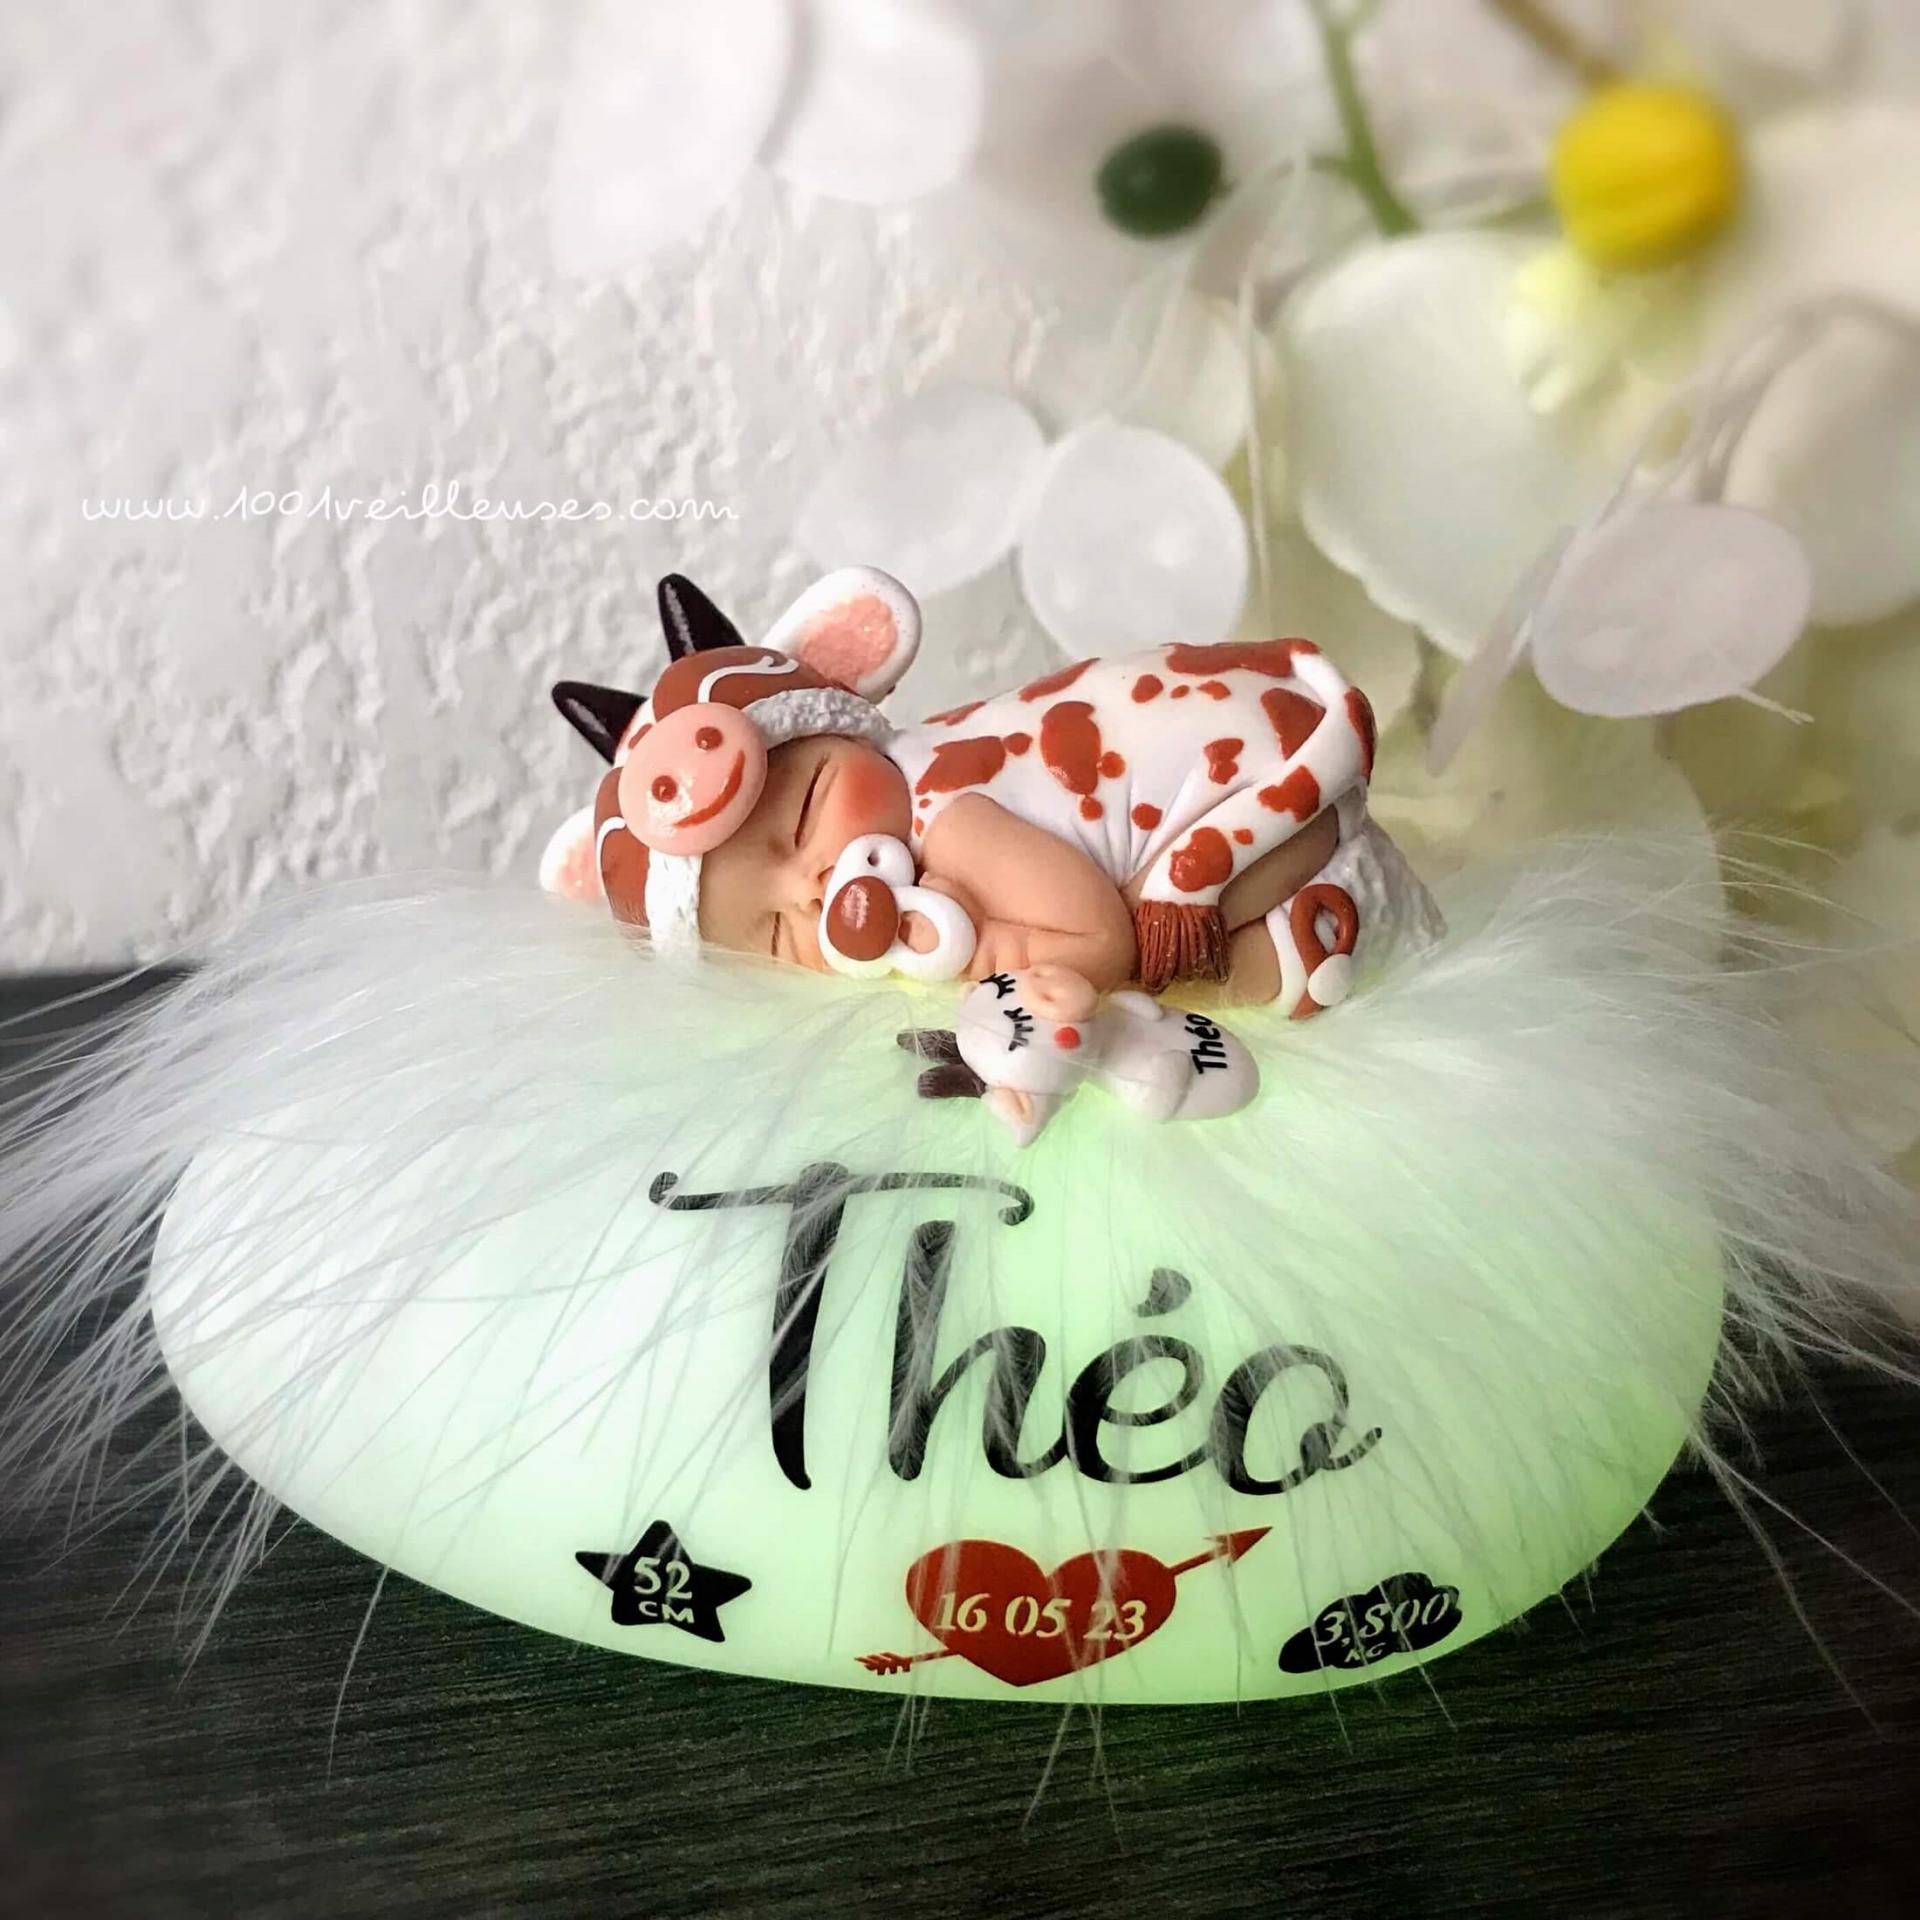 Illuminated night light with a handmade baby dressed in cow colors, personalized with the name